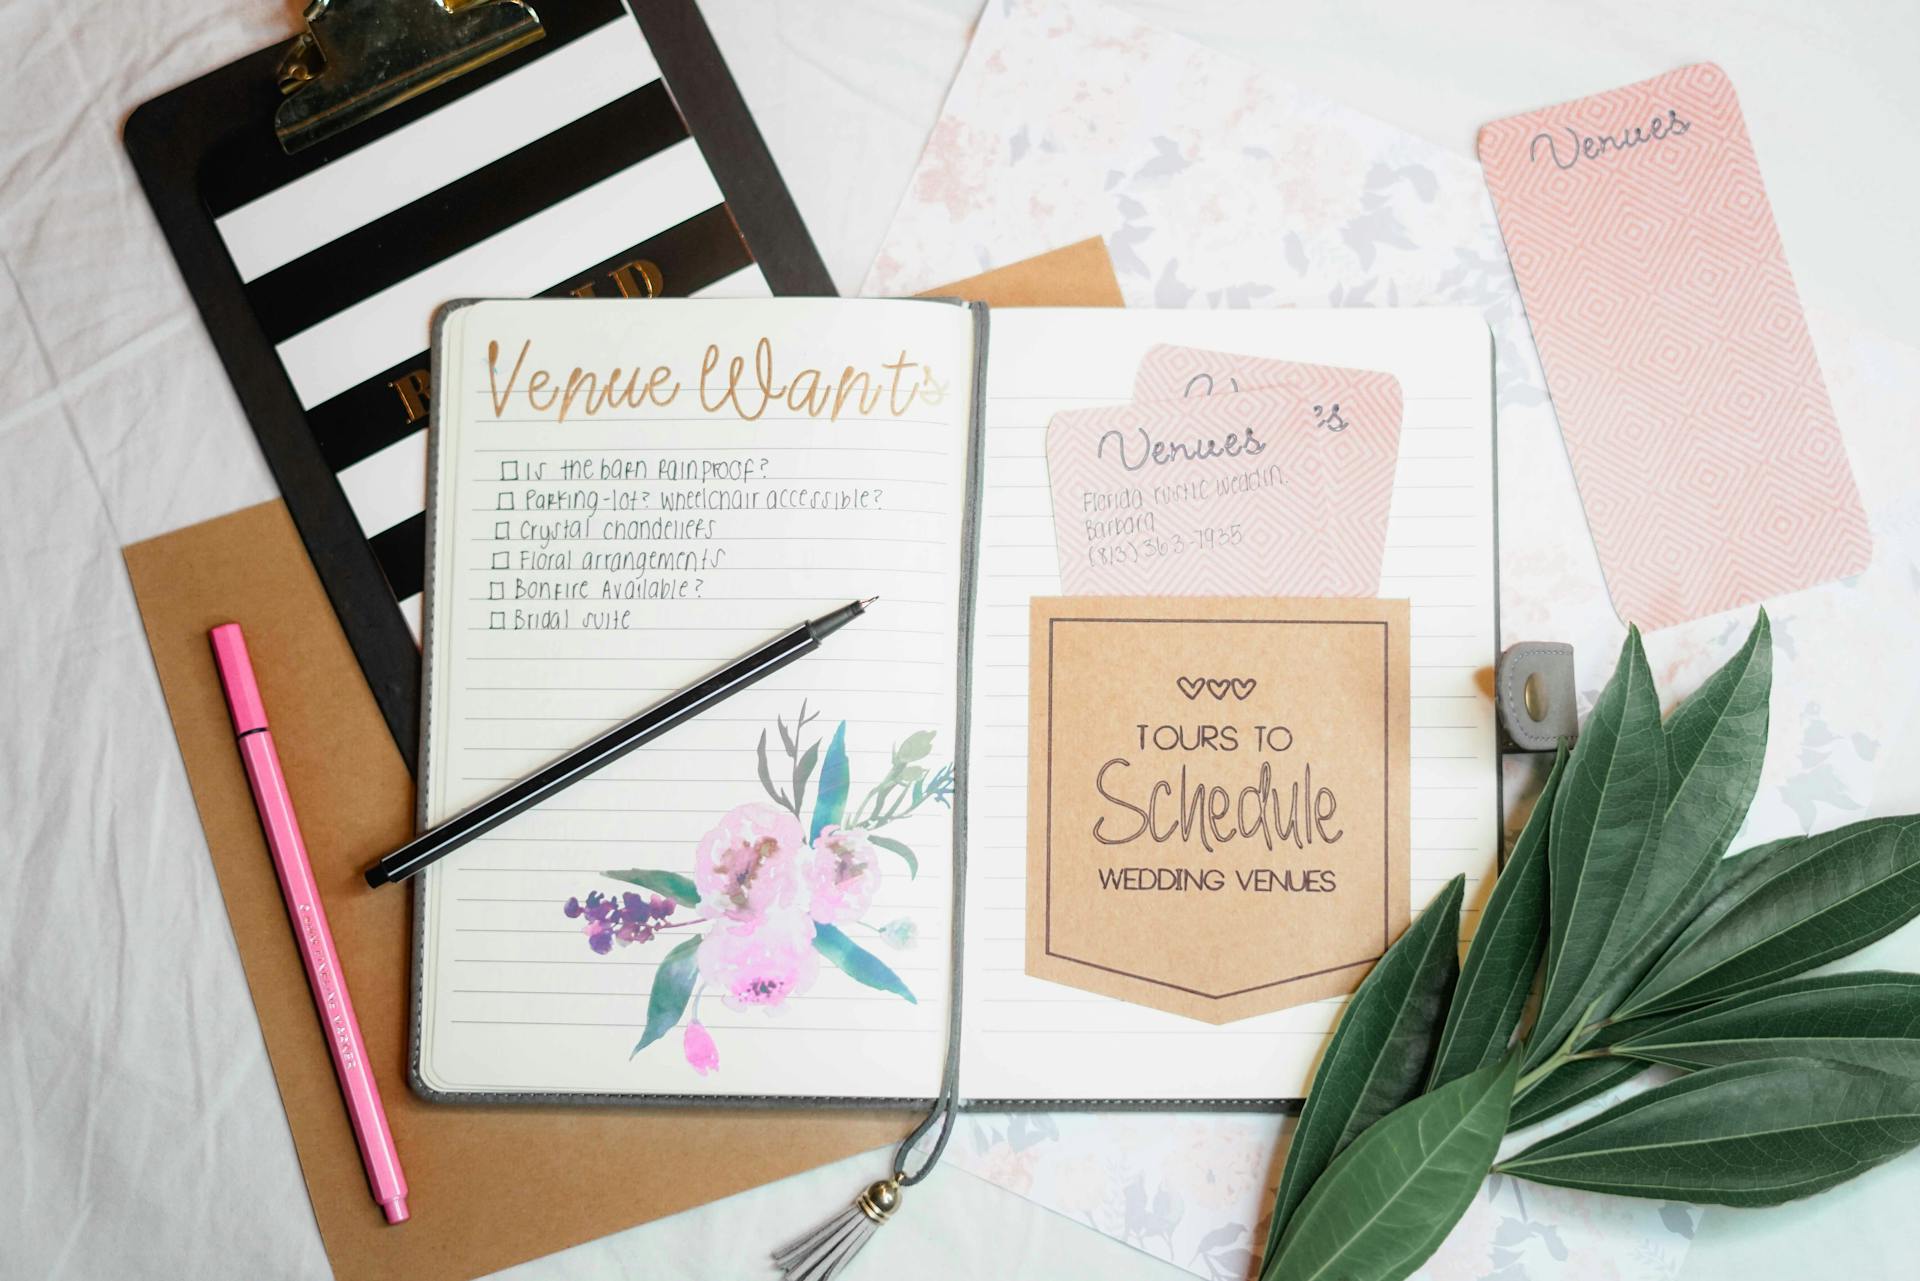 A wedding planner and notebooks | Source: Pexels